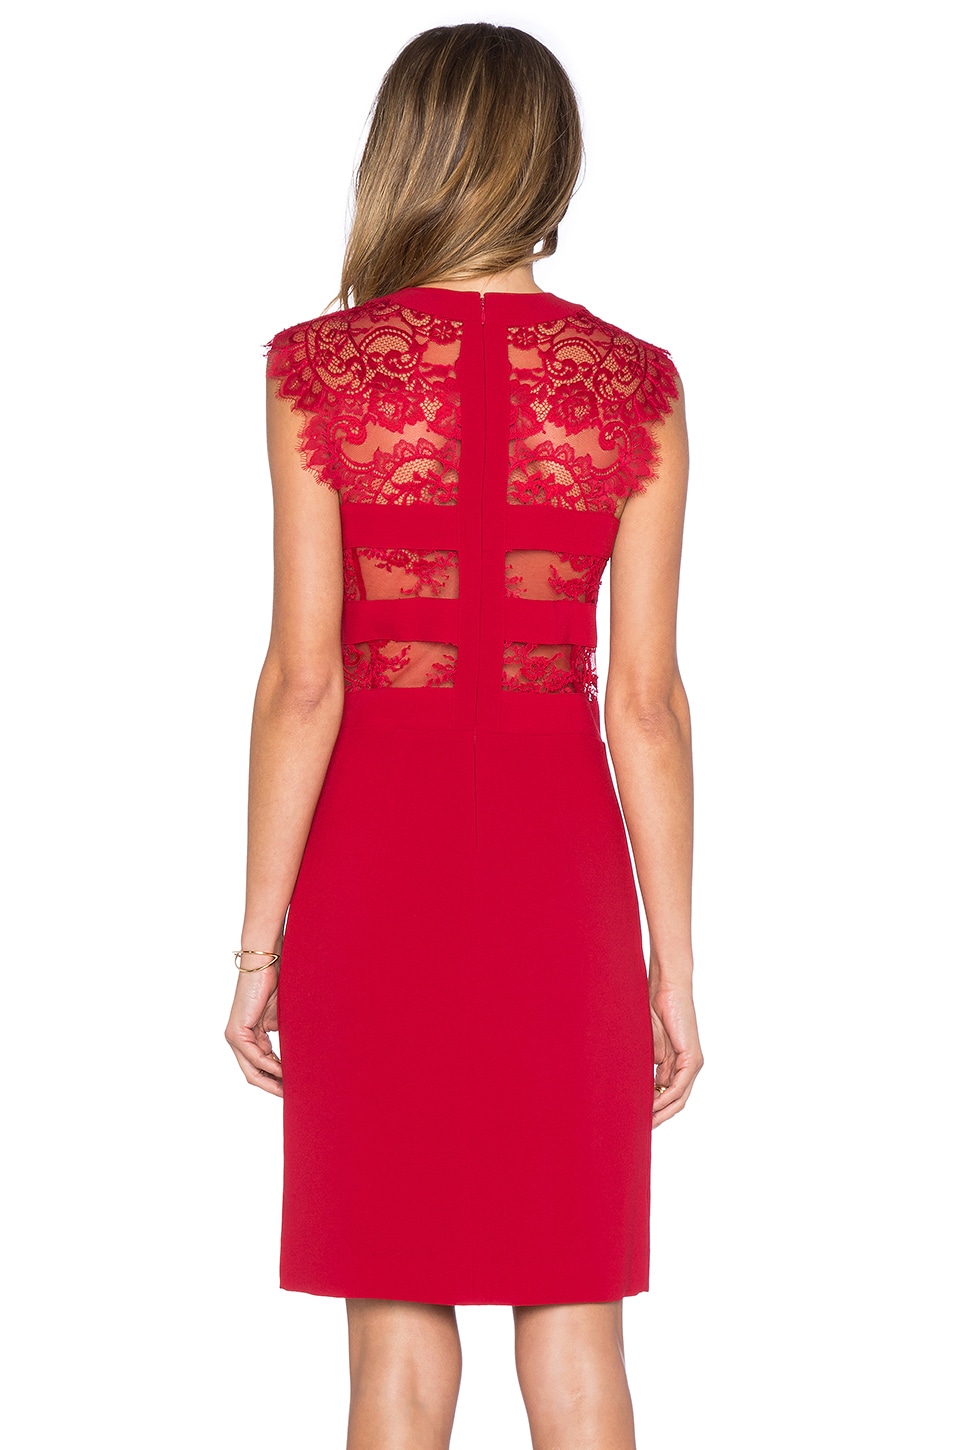 The Kooples Lace Dress in Red | REVOLVE